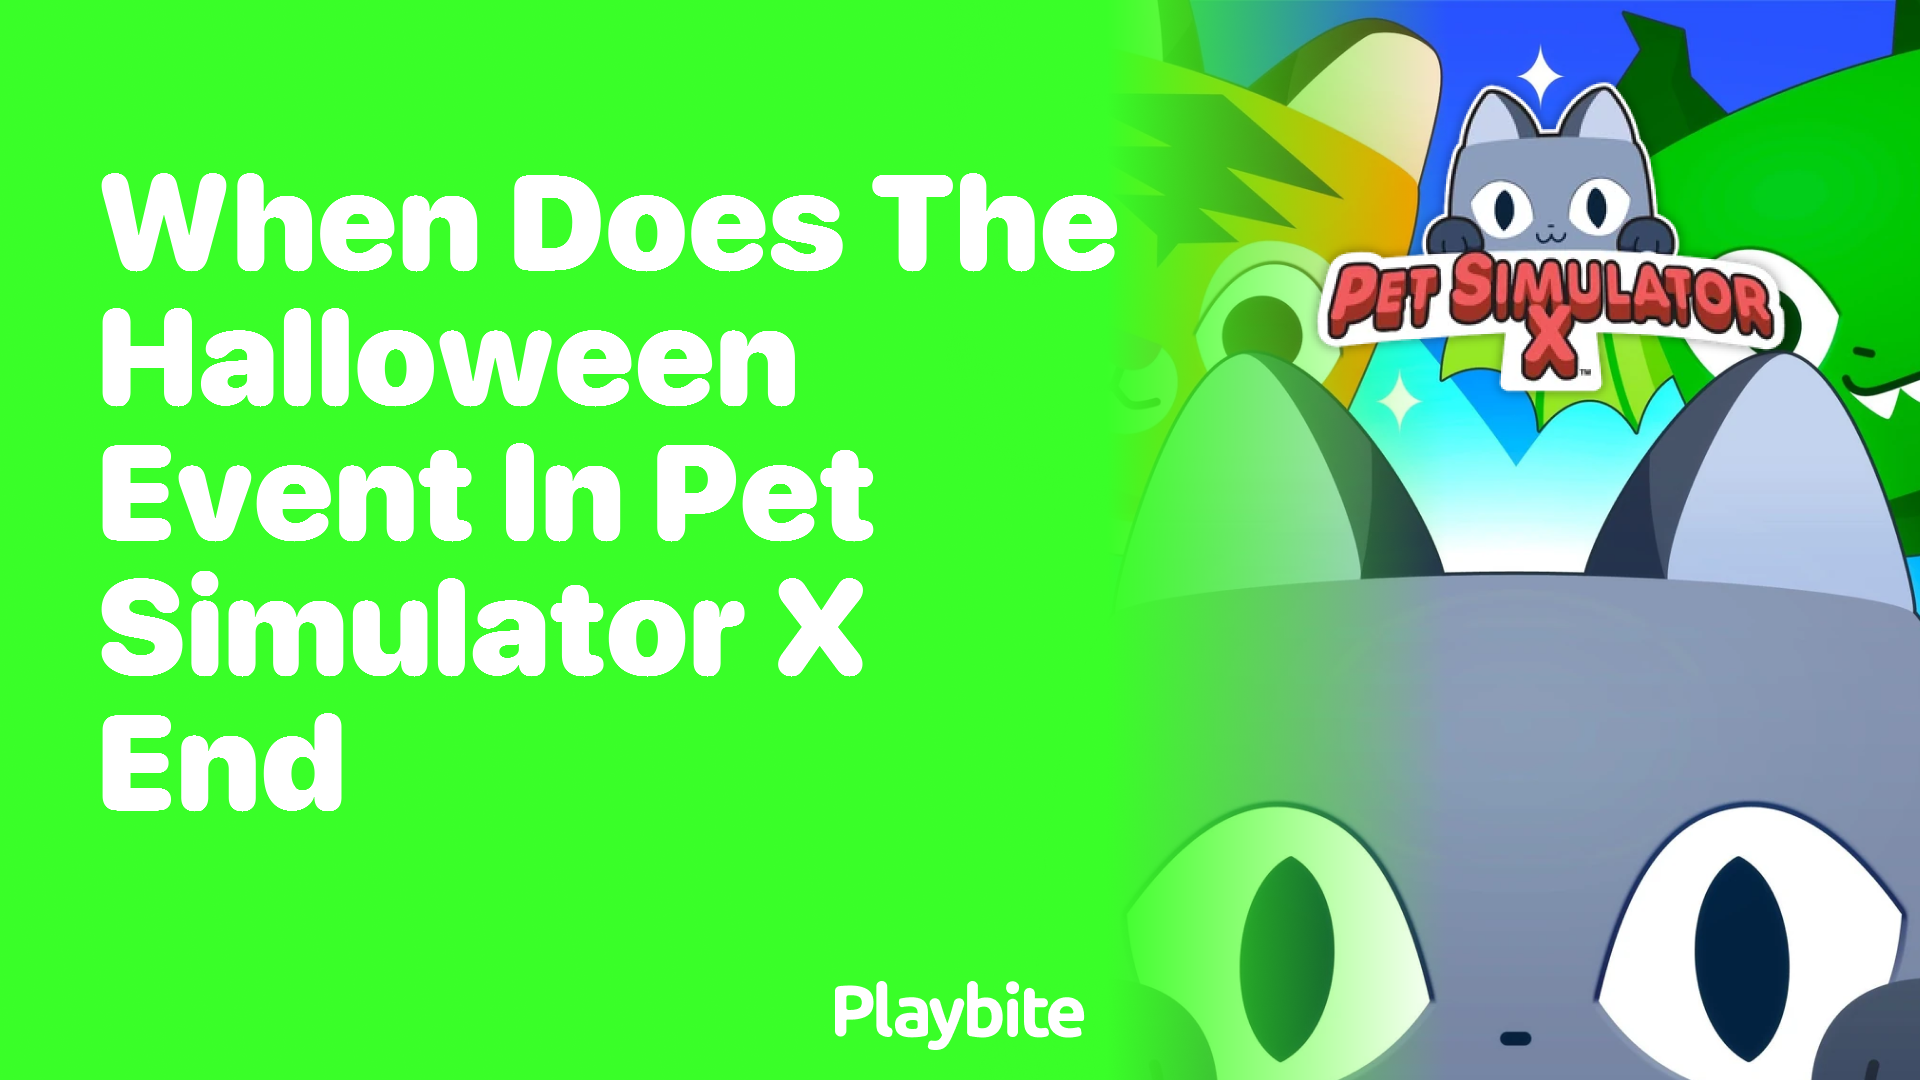 When does the Halloween event in Pet Simulator X end?